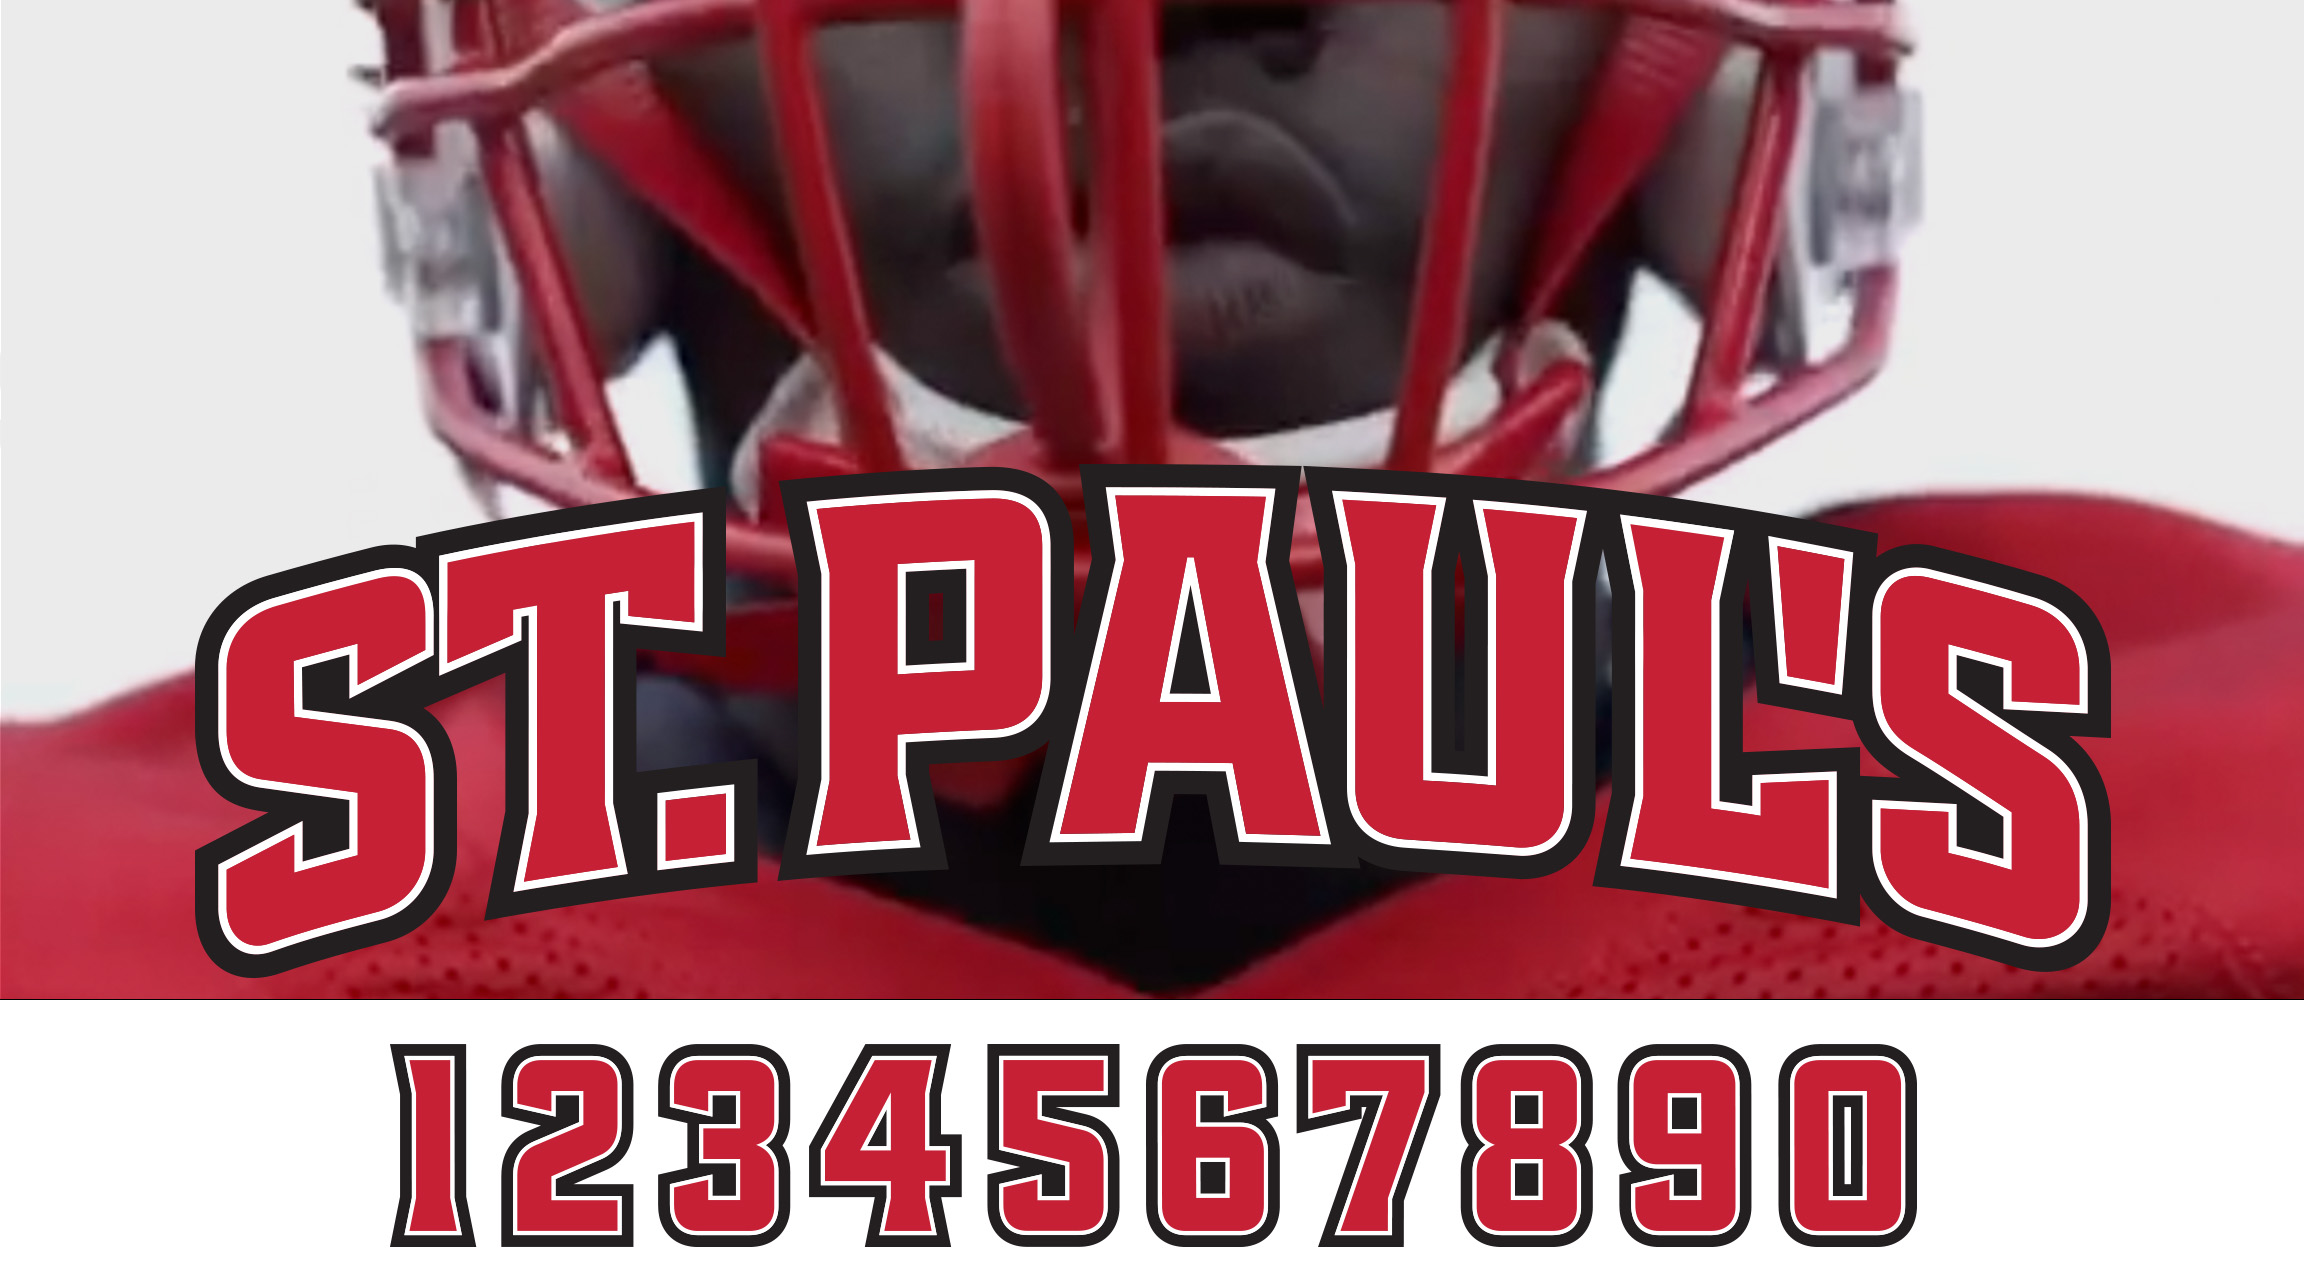 Paul's School athletic brand identity-curved wordmark and team numbers